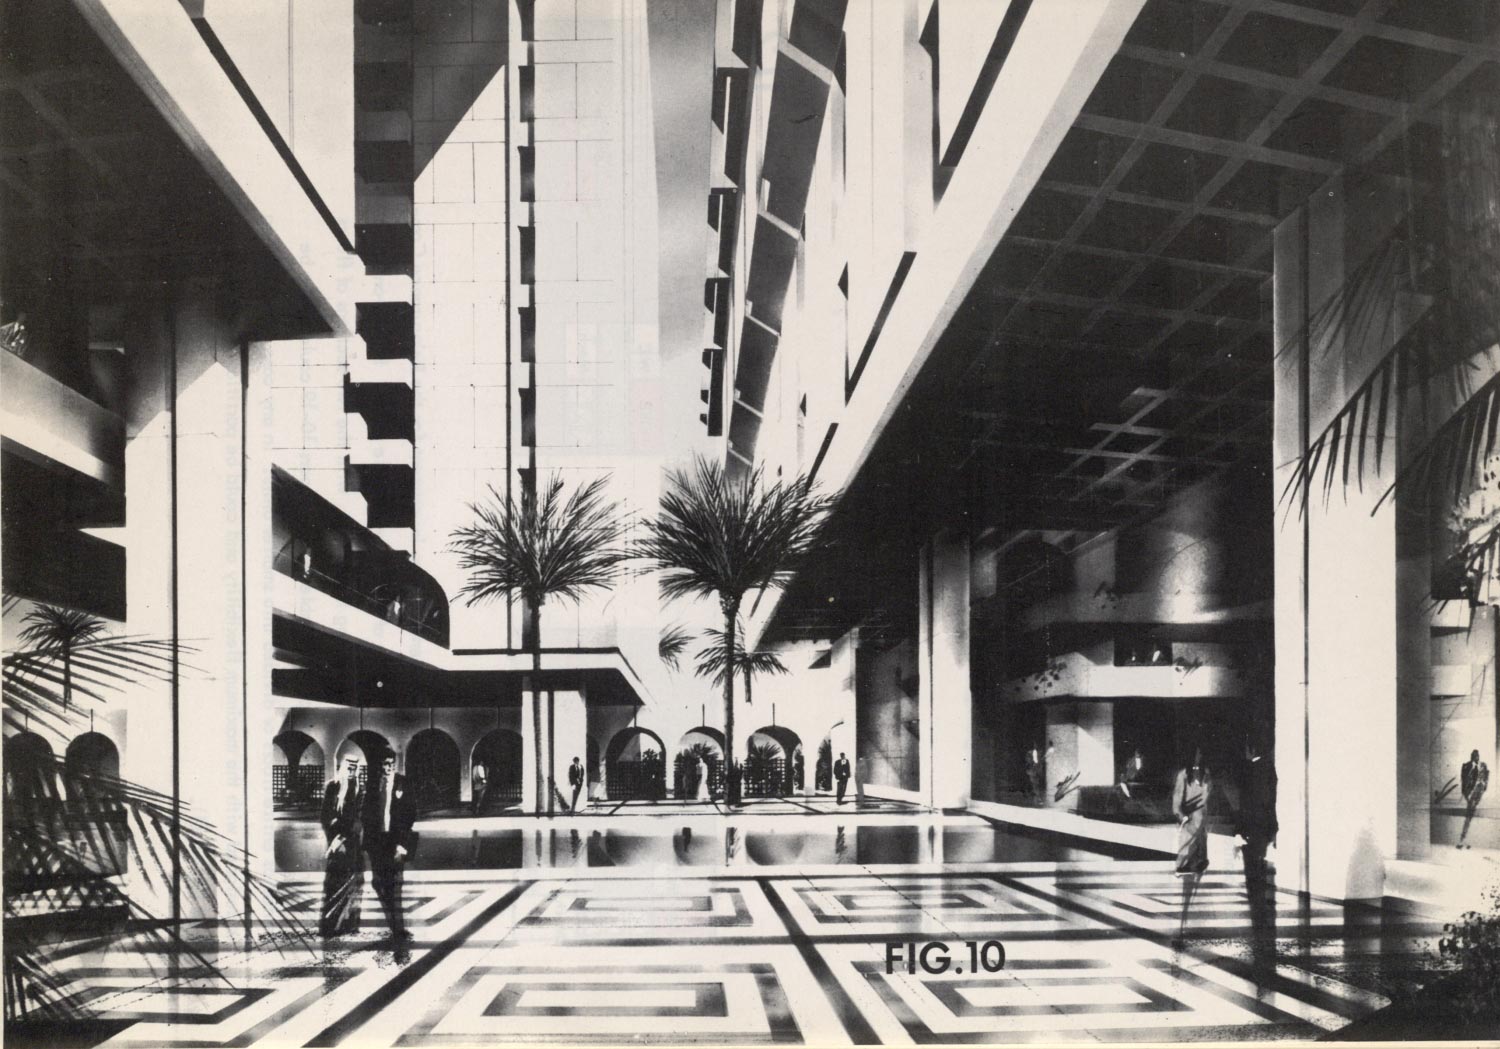 Rendering of the central section of the sixth floor of the Headquarters building, landscaped as a private courtyard overlooked by the Director General's office and the Board room